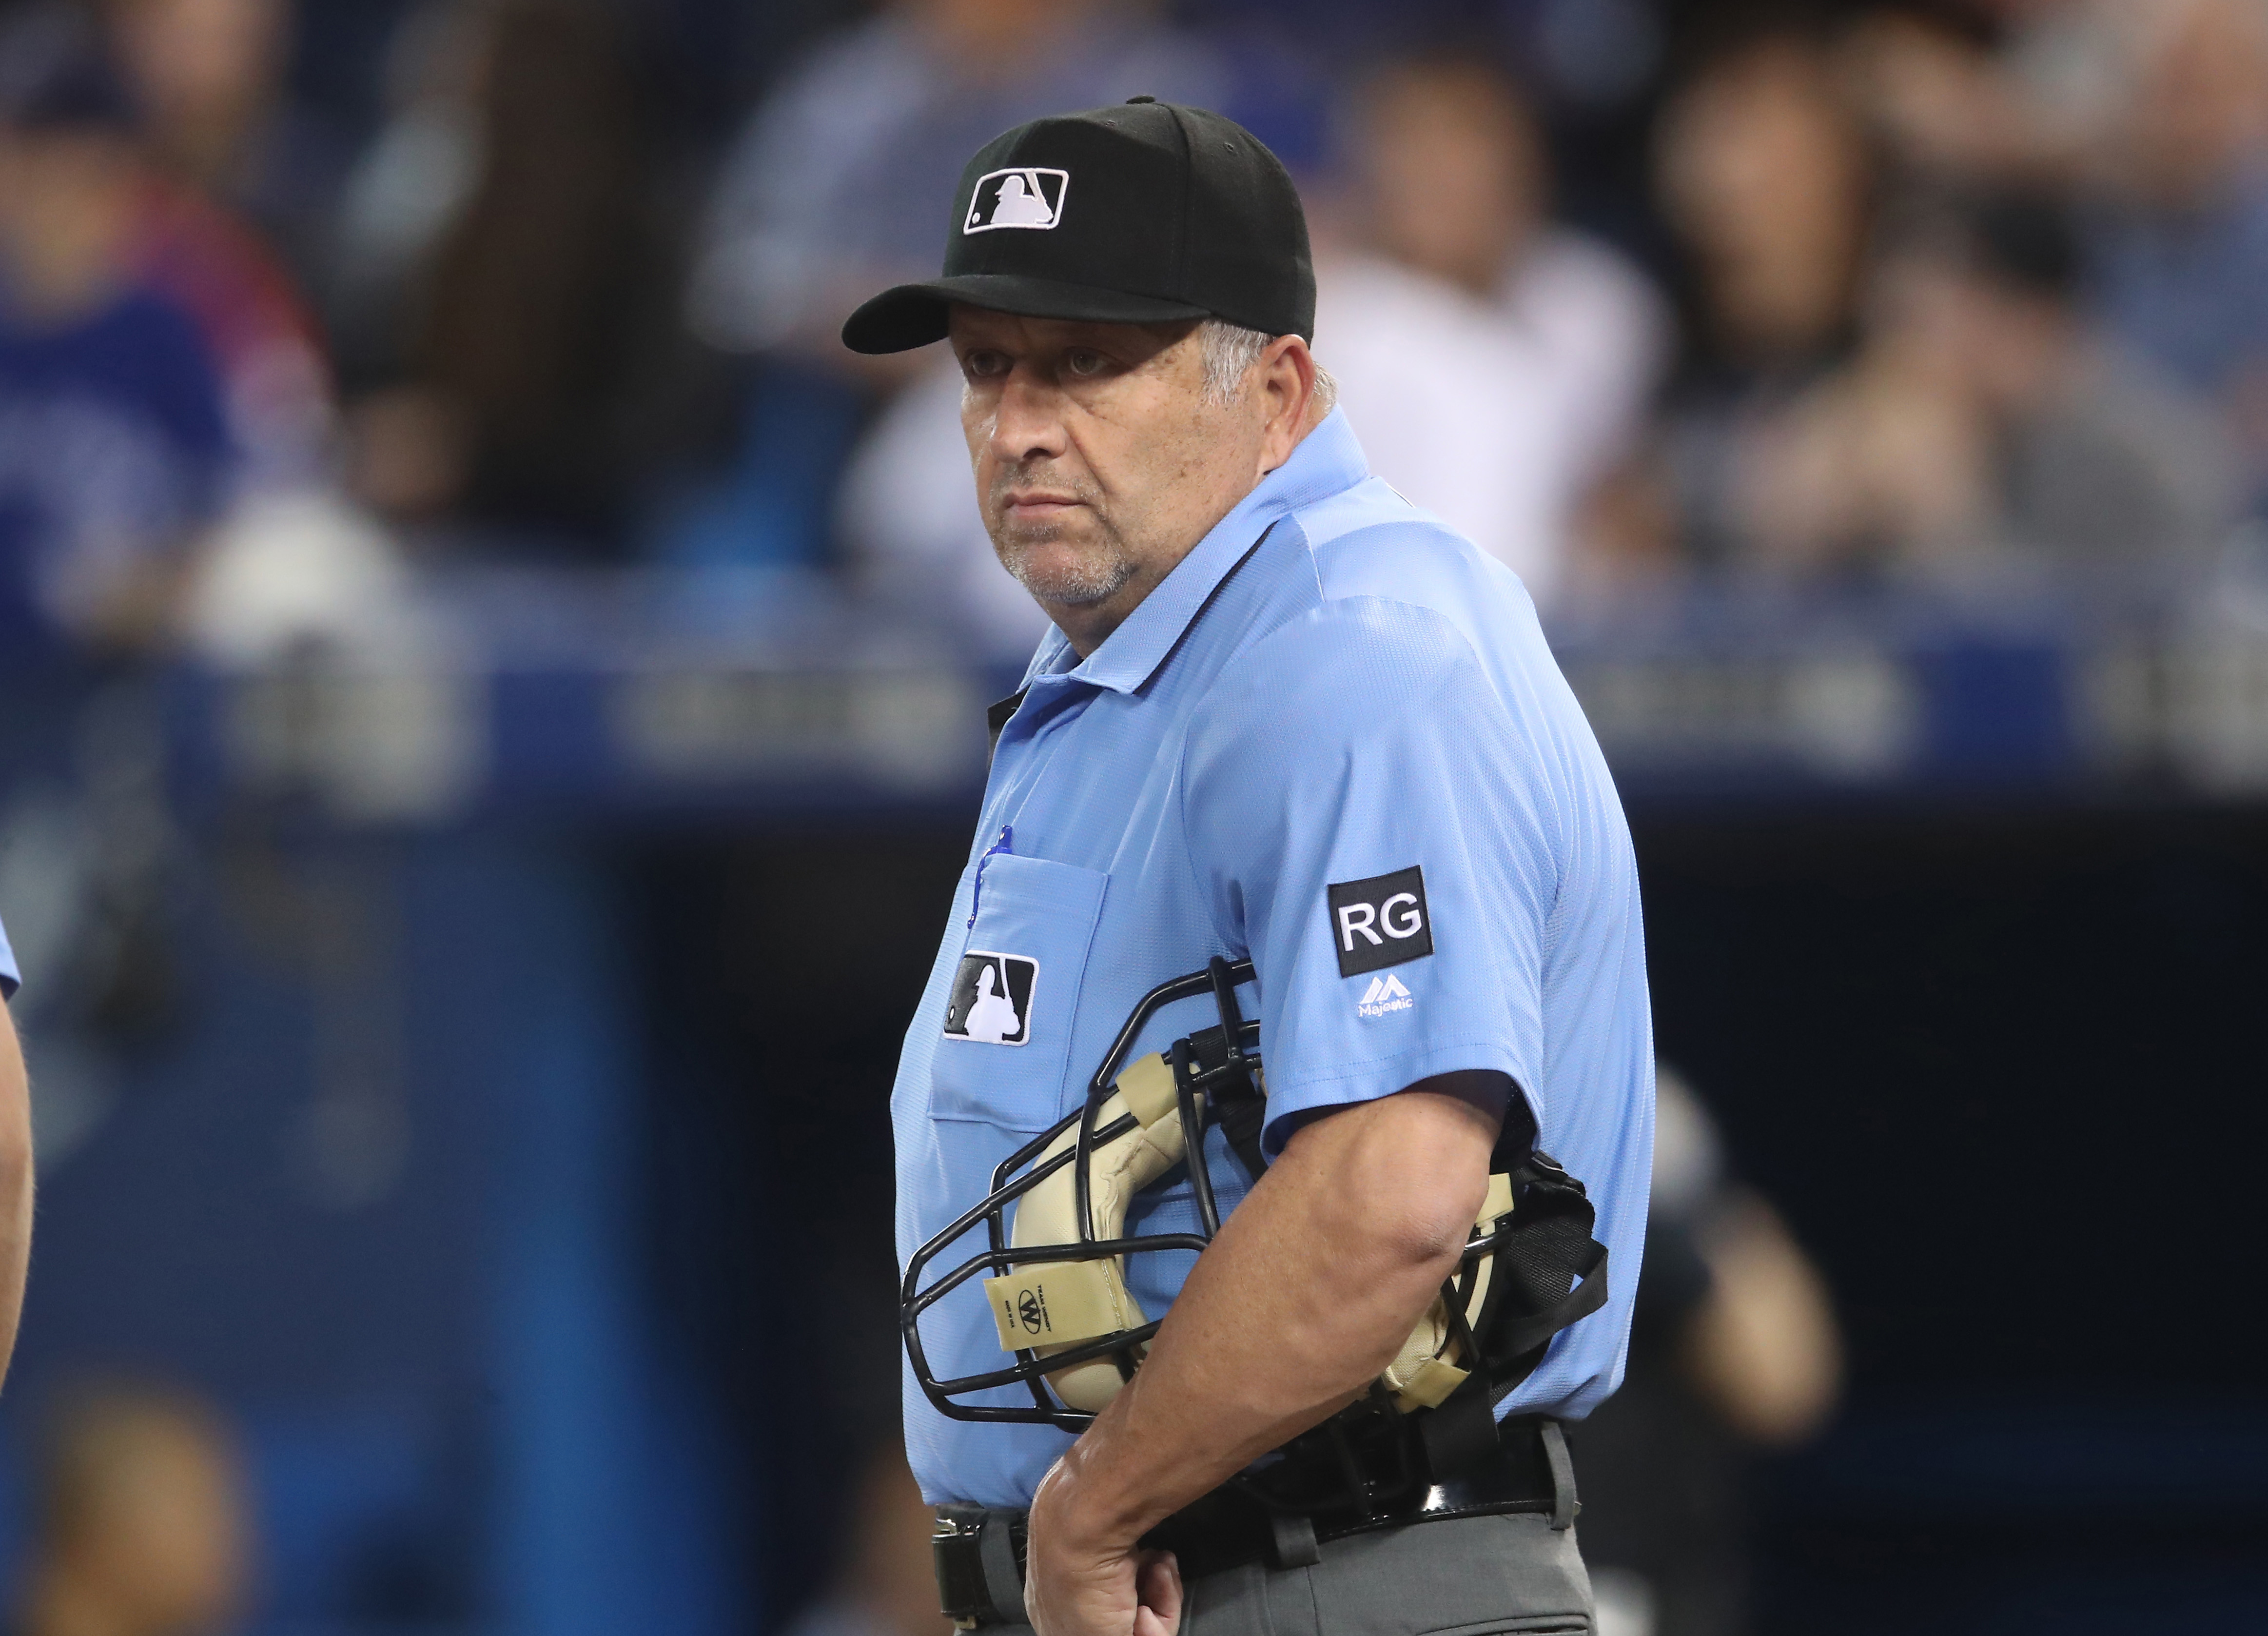 Dale Scott, shown in 2017, was an umpire for 30 years.